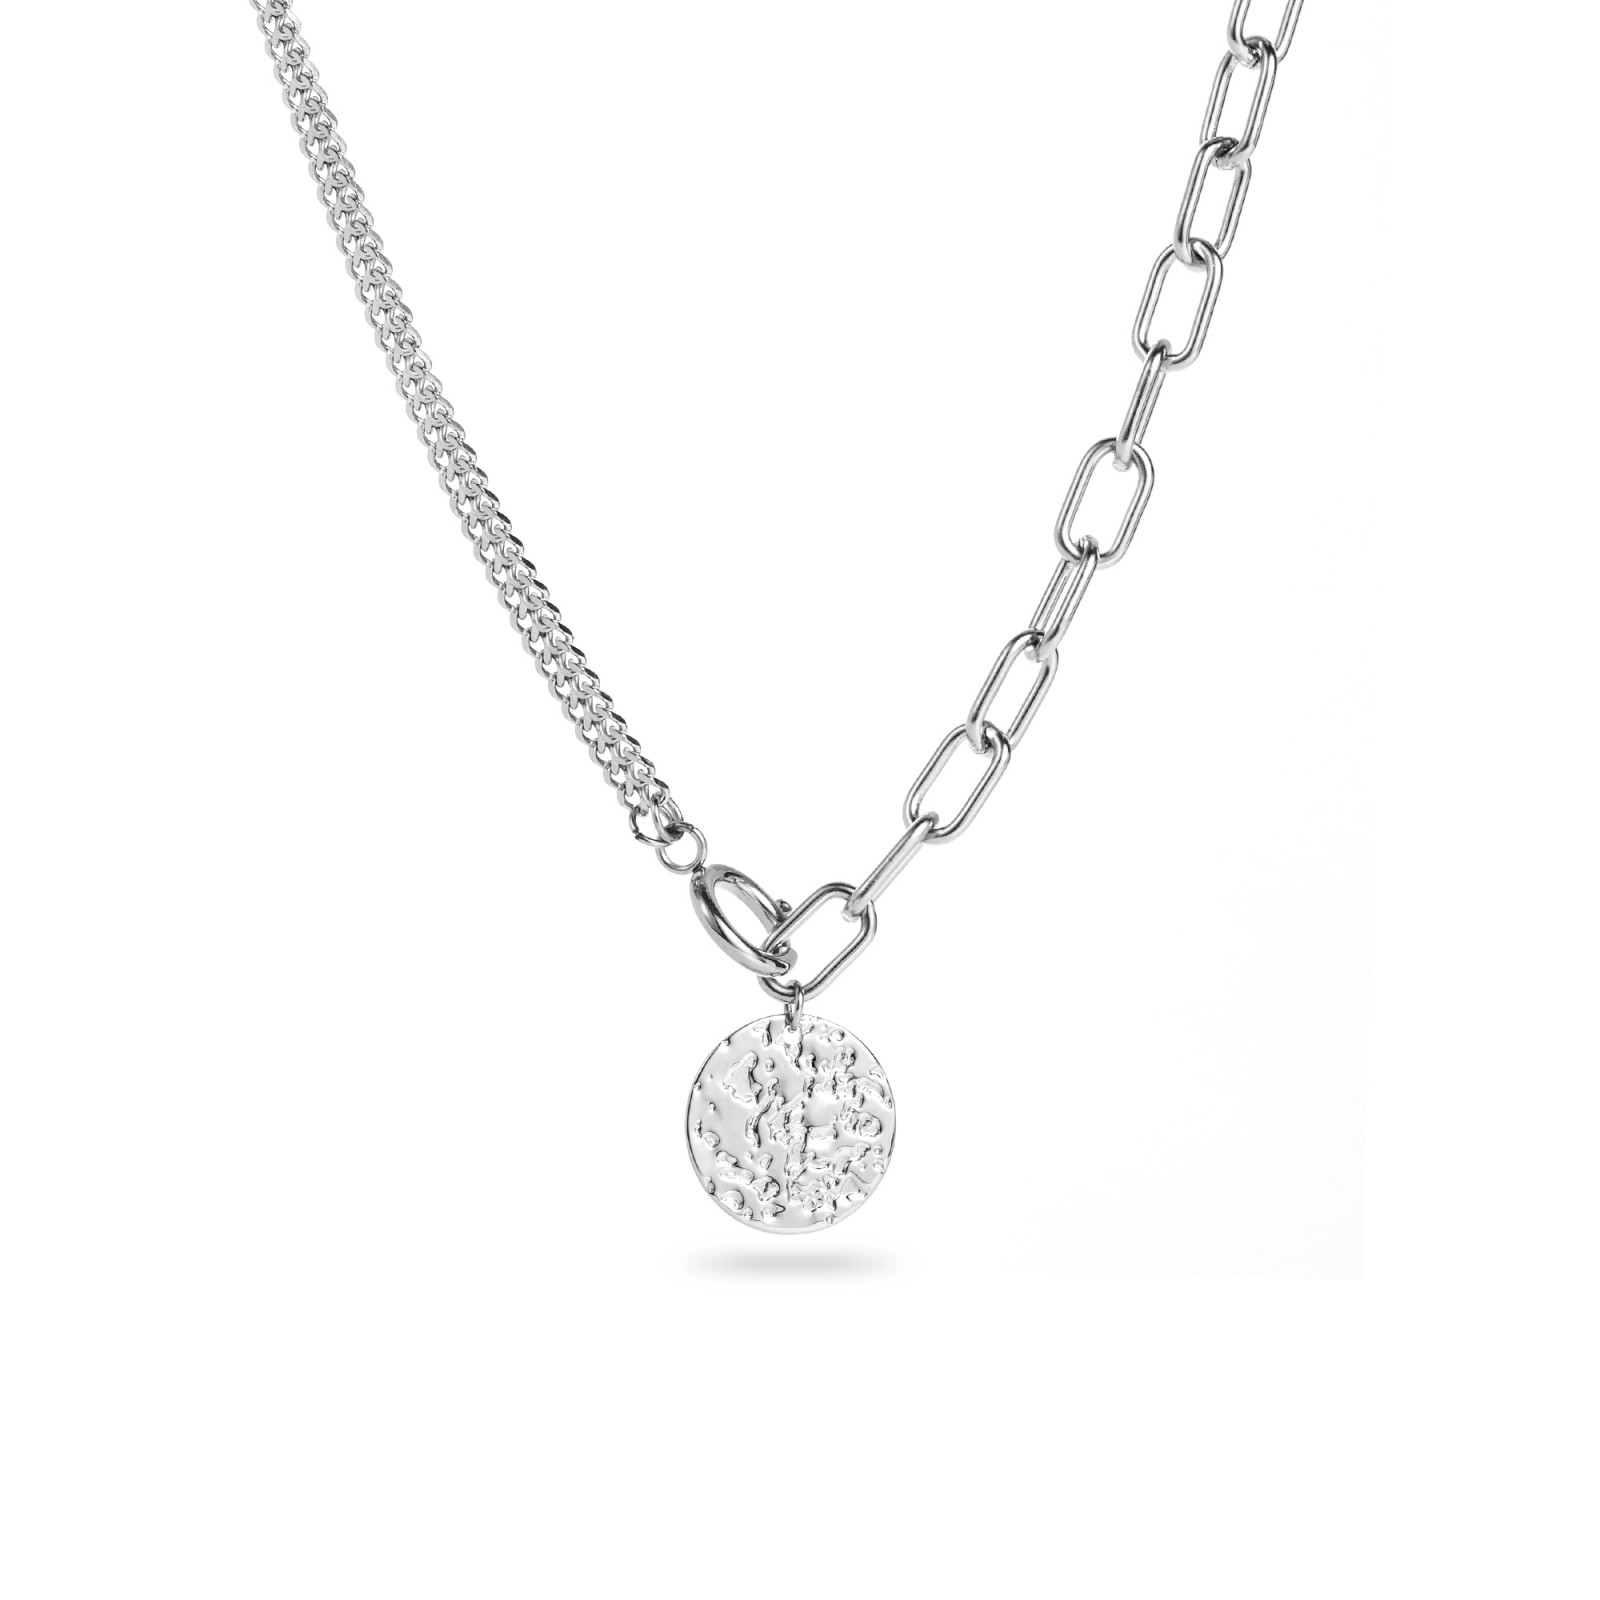 Stainless Steel Chain Necklass 